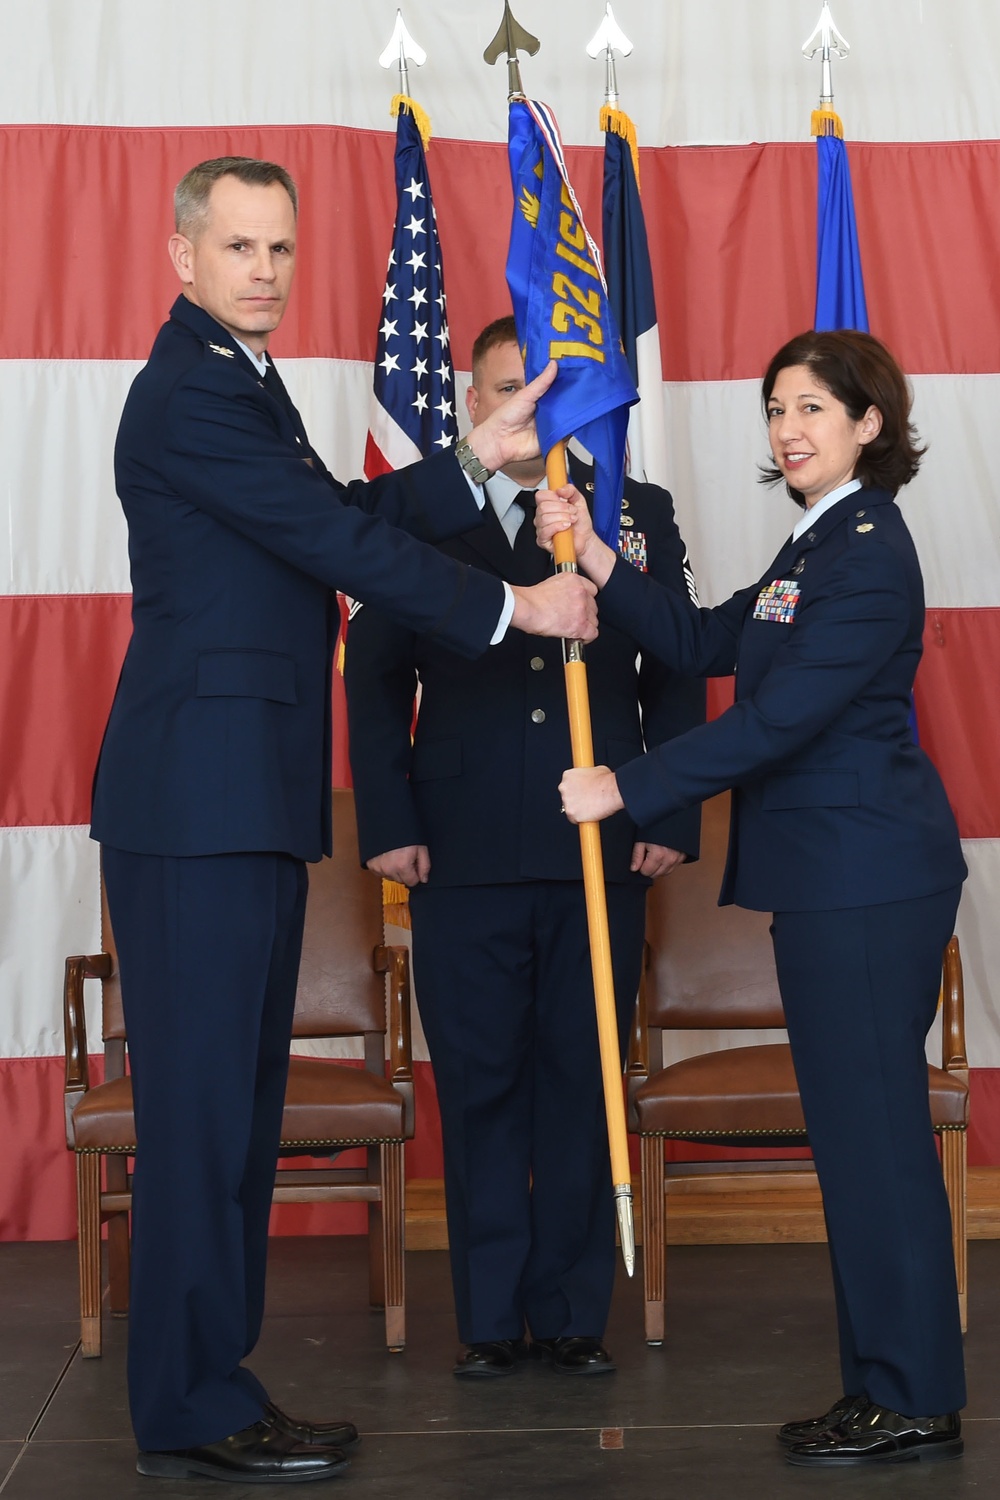 Greenfield assumes command of 132d ISS